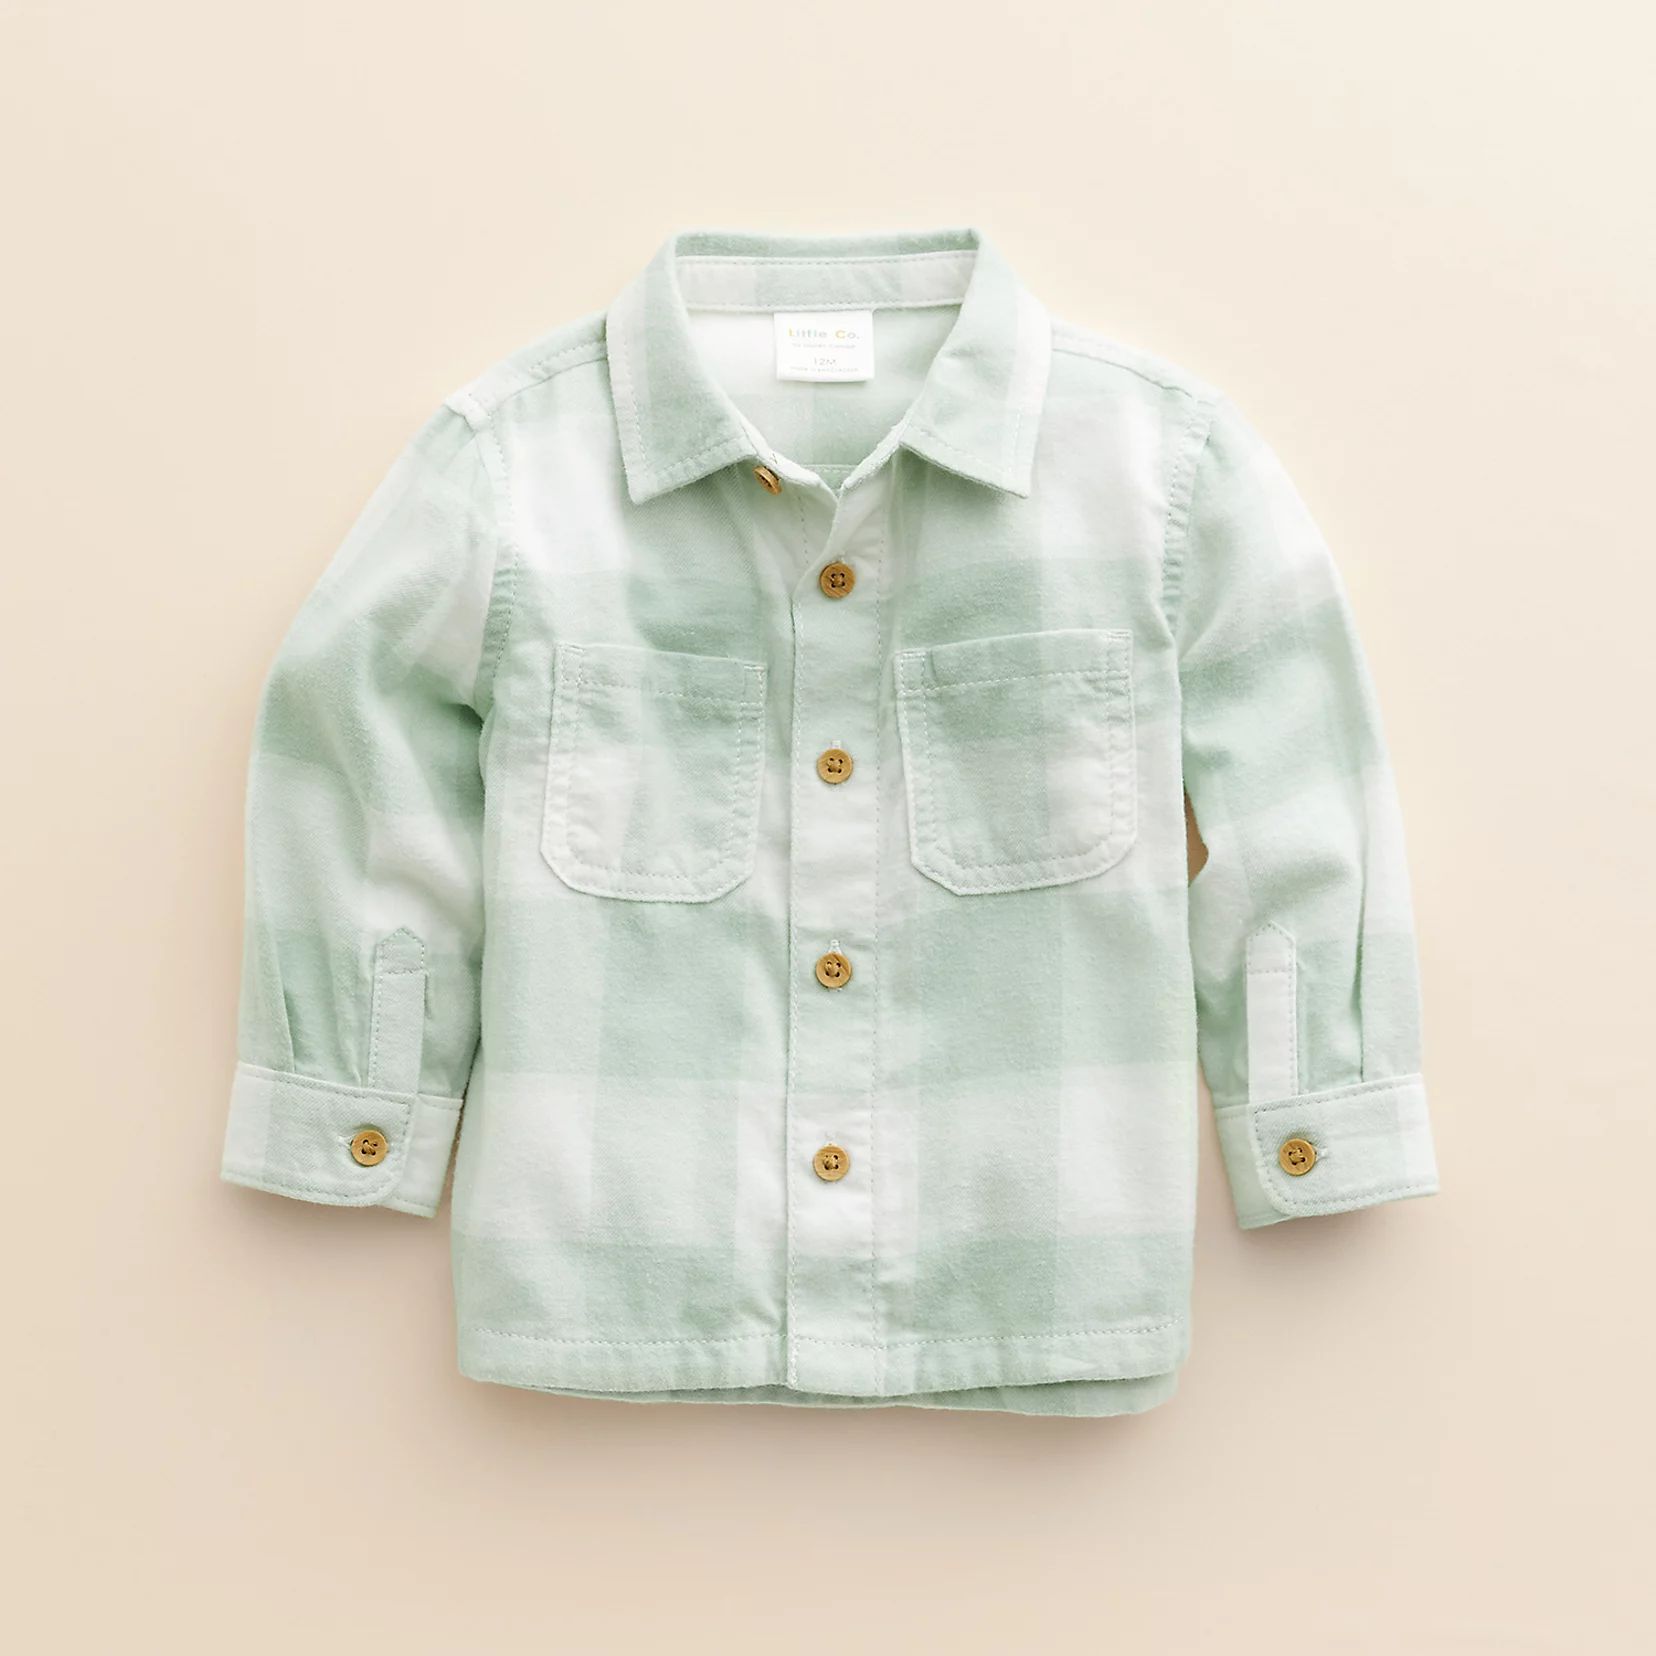 Baby & Toddler Little Co. by Lauren Conrad Organic Flannel Shirt | Kohl's